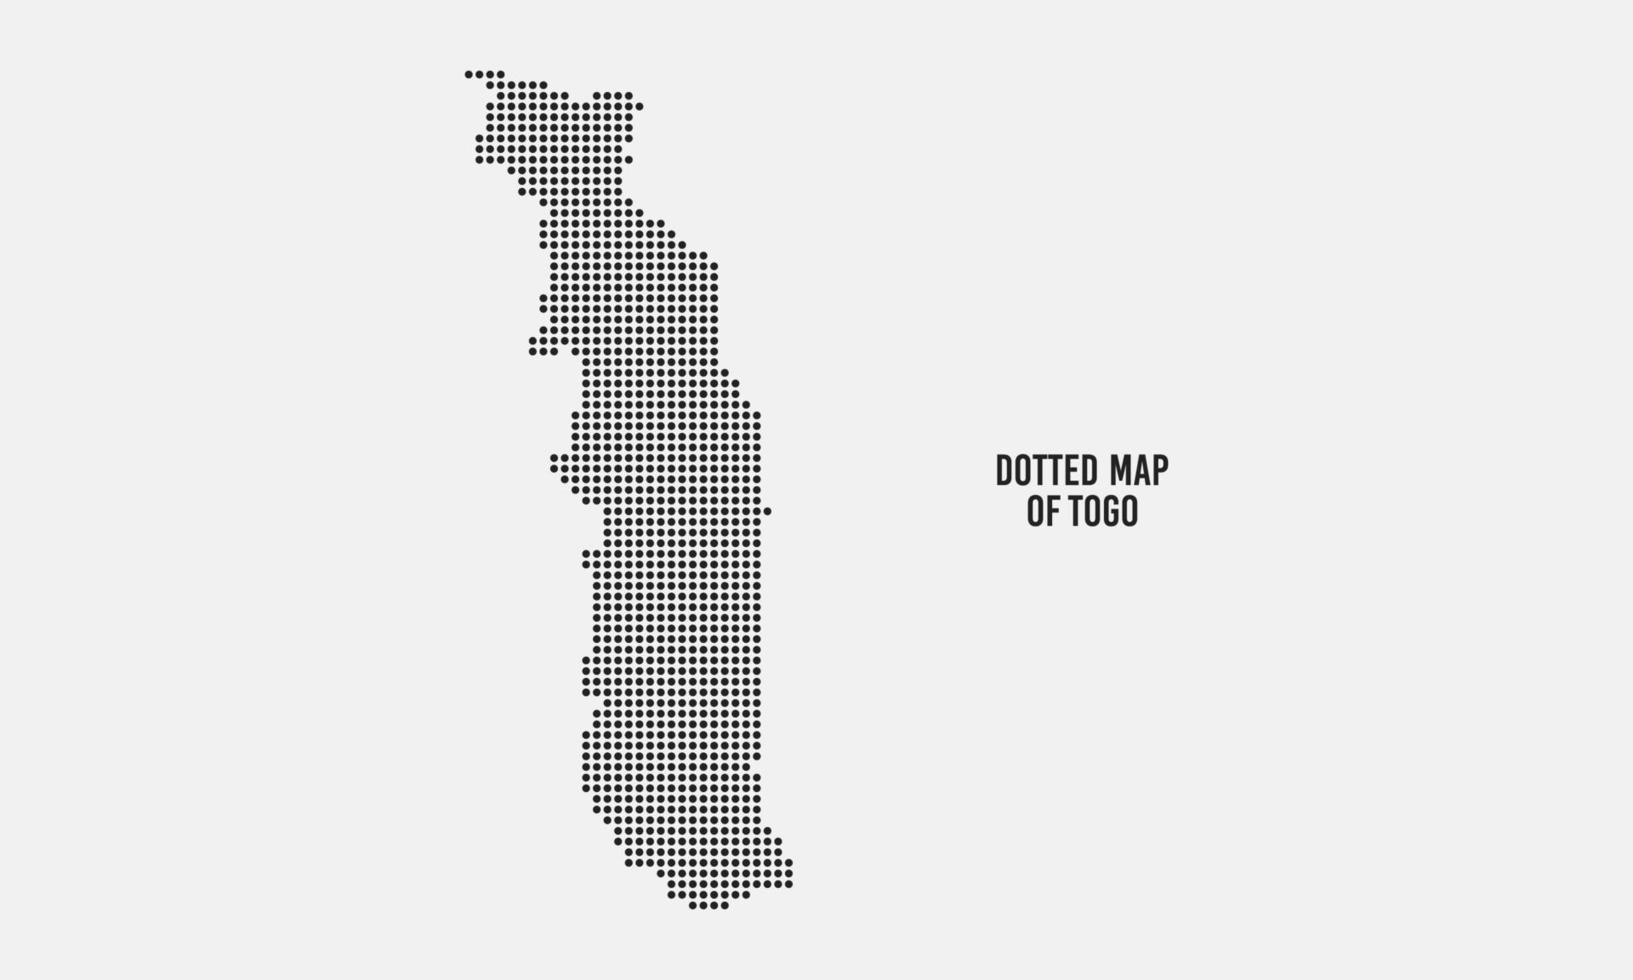 Abstract Dotted Togo Map vector